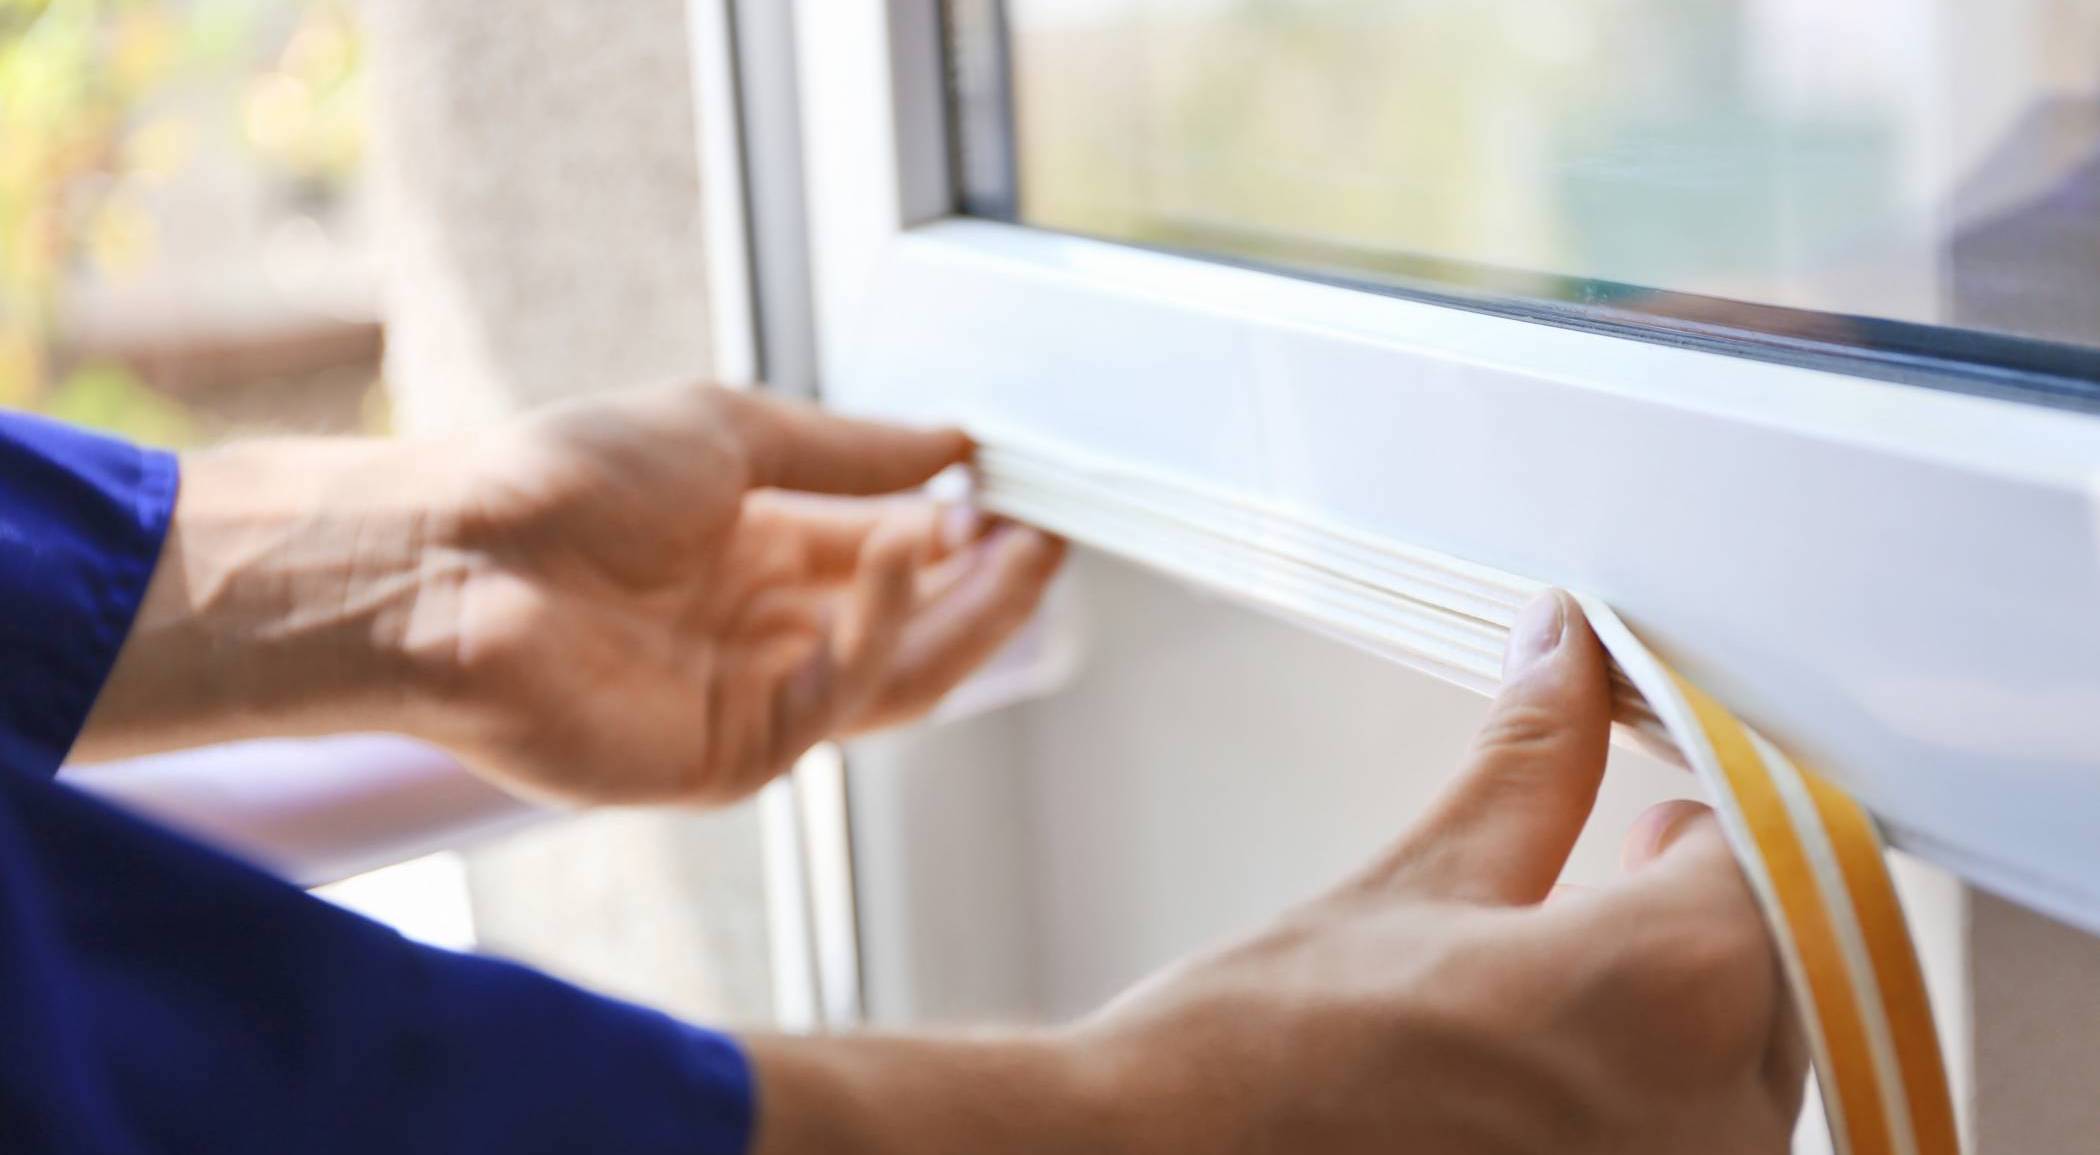 a person's hands putting a white plastic window seal on a window